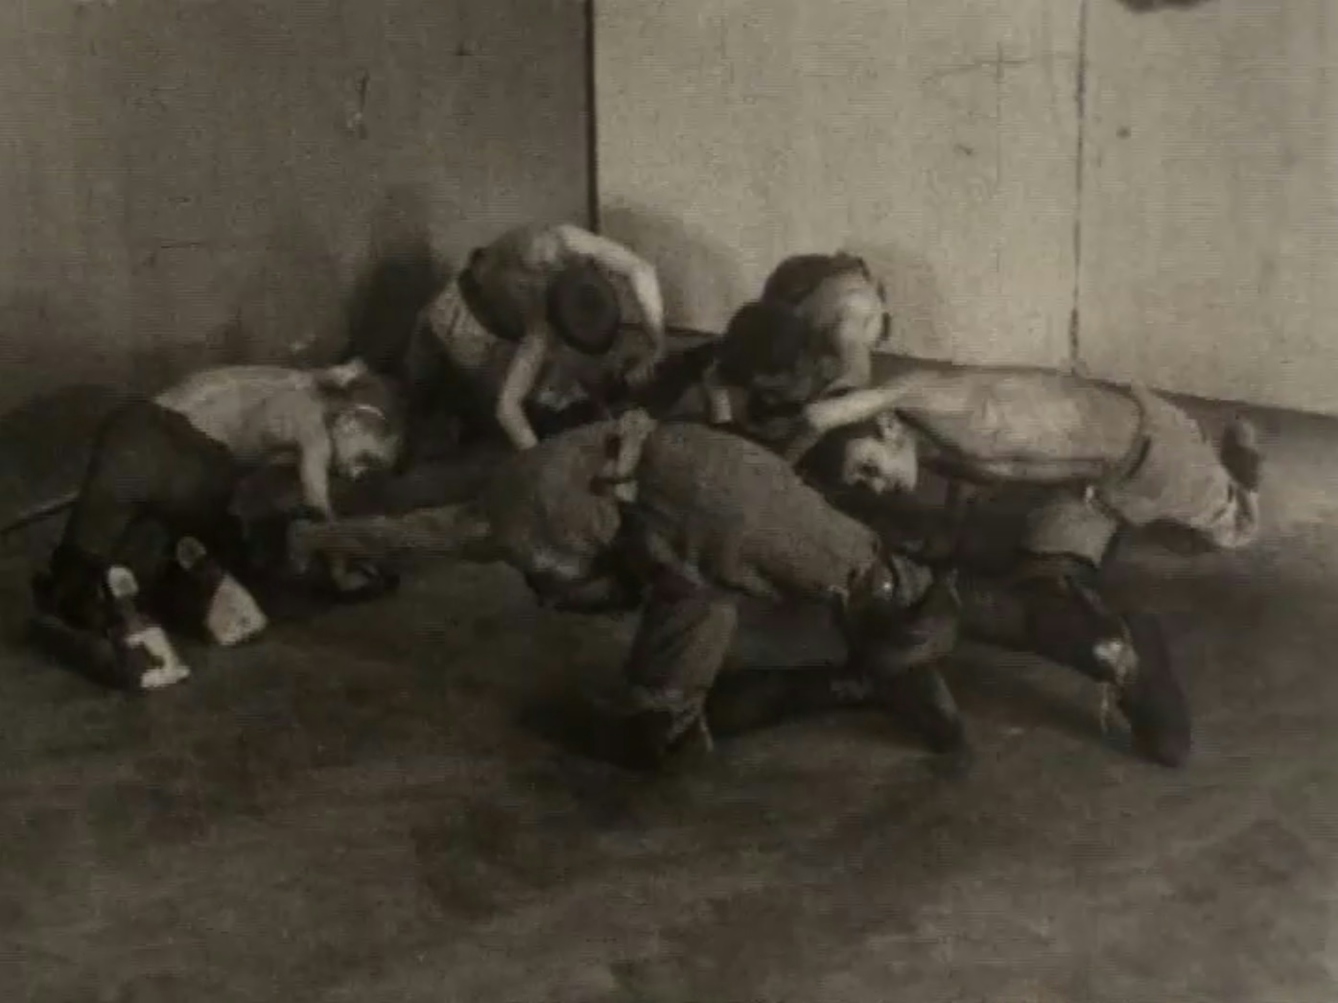 Black and white still from a film showing boys crawling around in a circle on the floor, arching their arms over their heads as if swimming.